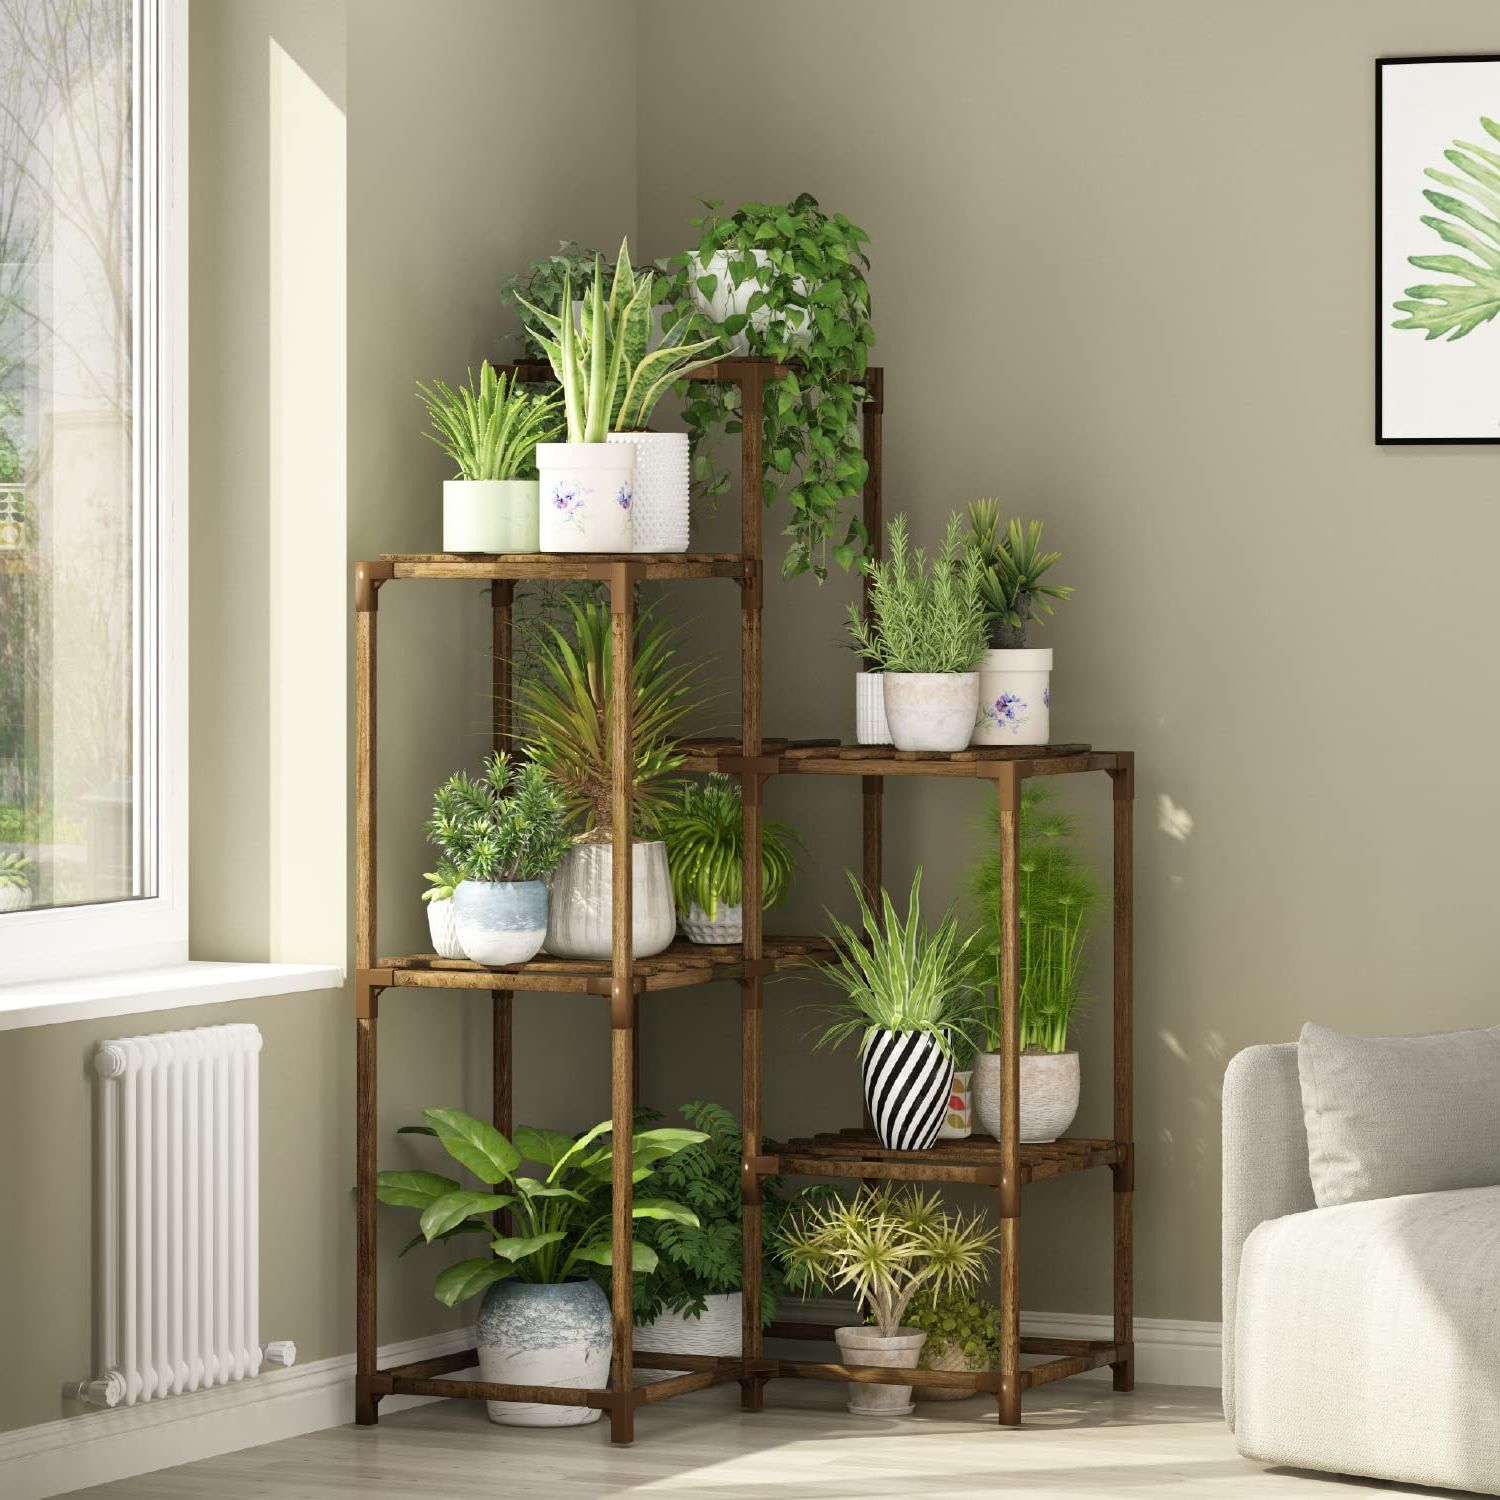 Newest Outdoor Plant Stands With Regard To Amazon: Plant Stands Indoor Outdoor Corner Shelf Plant Shelves Indoor  Plant Holder For Living 7 Tier Corner Stands Room Outdoor Plant Rack Indoor  Multiple Plants Patio Balcony Garden : Patio, Lawn & Garden (View 6 of 15)